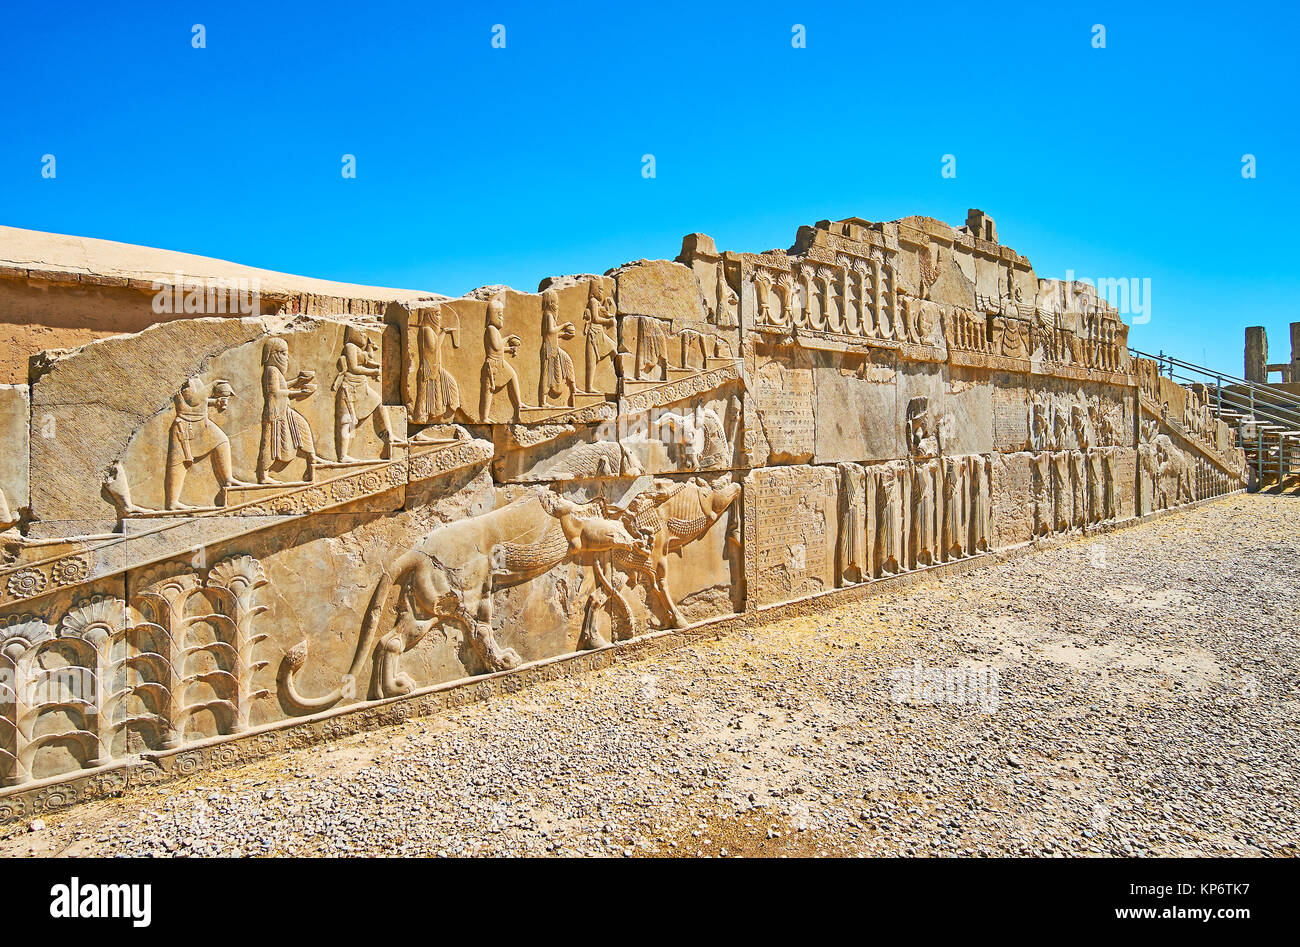 The ruined facade wall of the ancient palace of Xerxes (Hadish) with preserved reliefs, including classical Persian themes - lion and bull, soldiers a Stock Photo